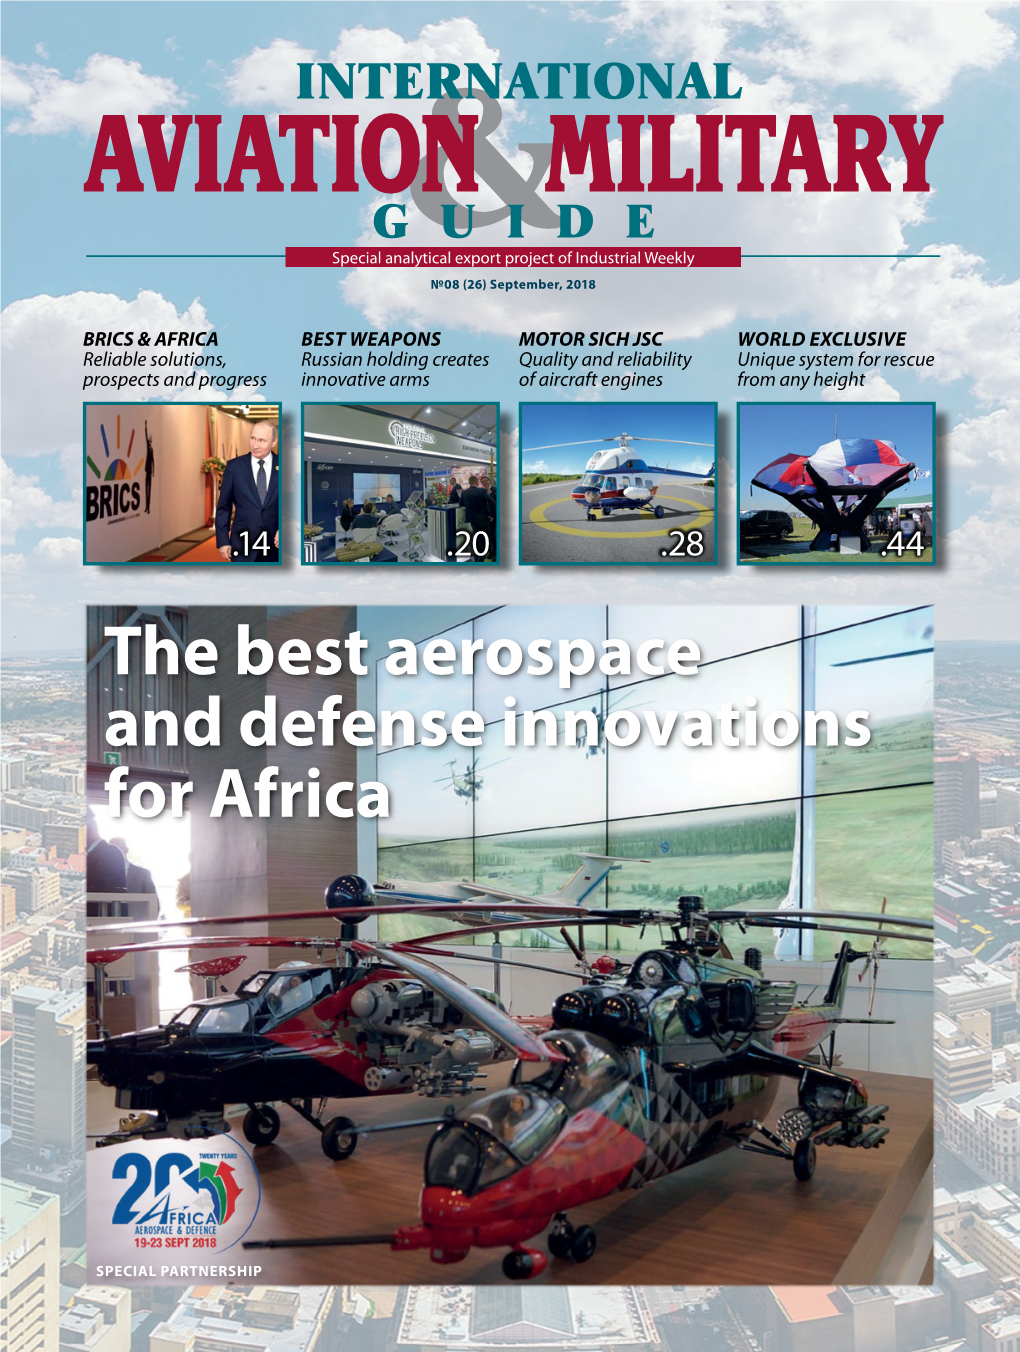 The Best Aerospace and Defense Innovations for Africa